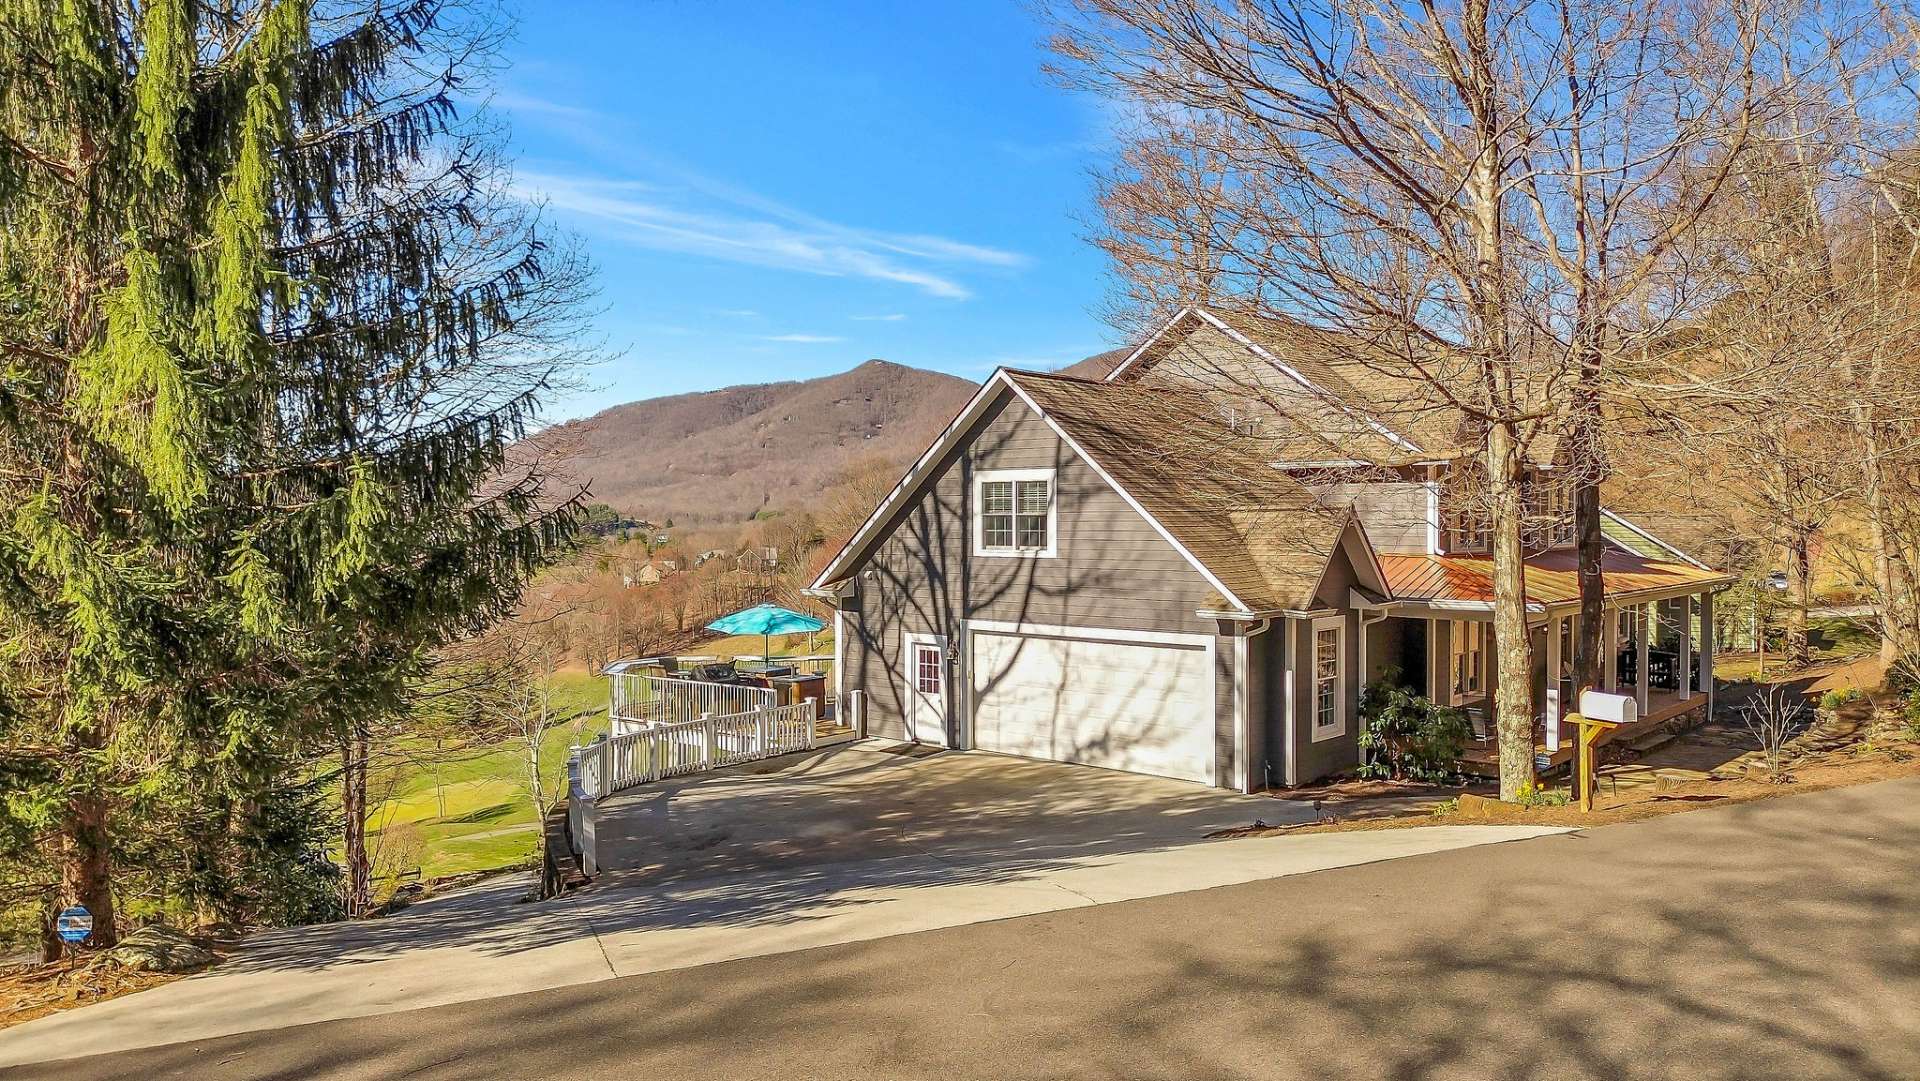 Nestled within the majestic Blue Ridge Mountains of northwest North Carolina, this spectacular home is conveniently located only 9 minutes from West Jefferson and 29 minutes from Boone.